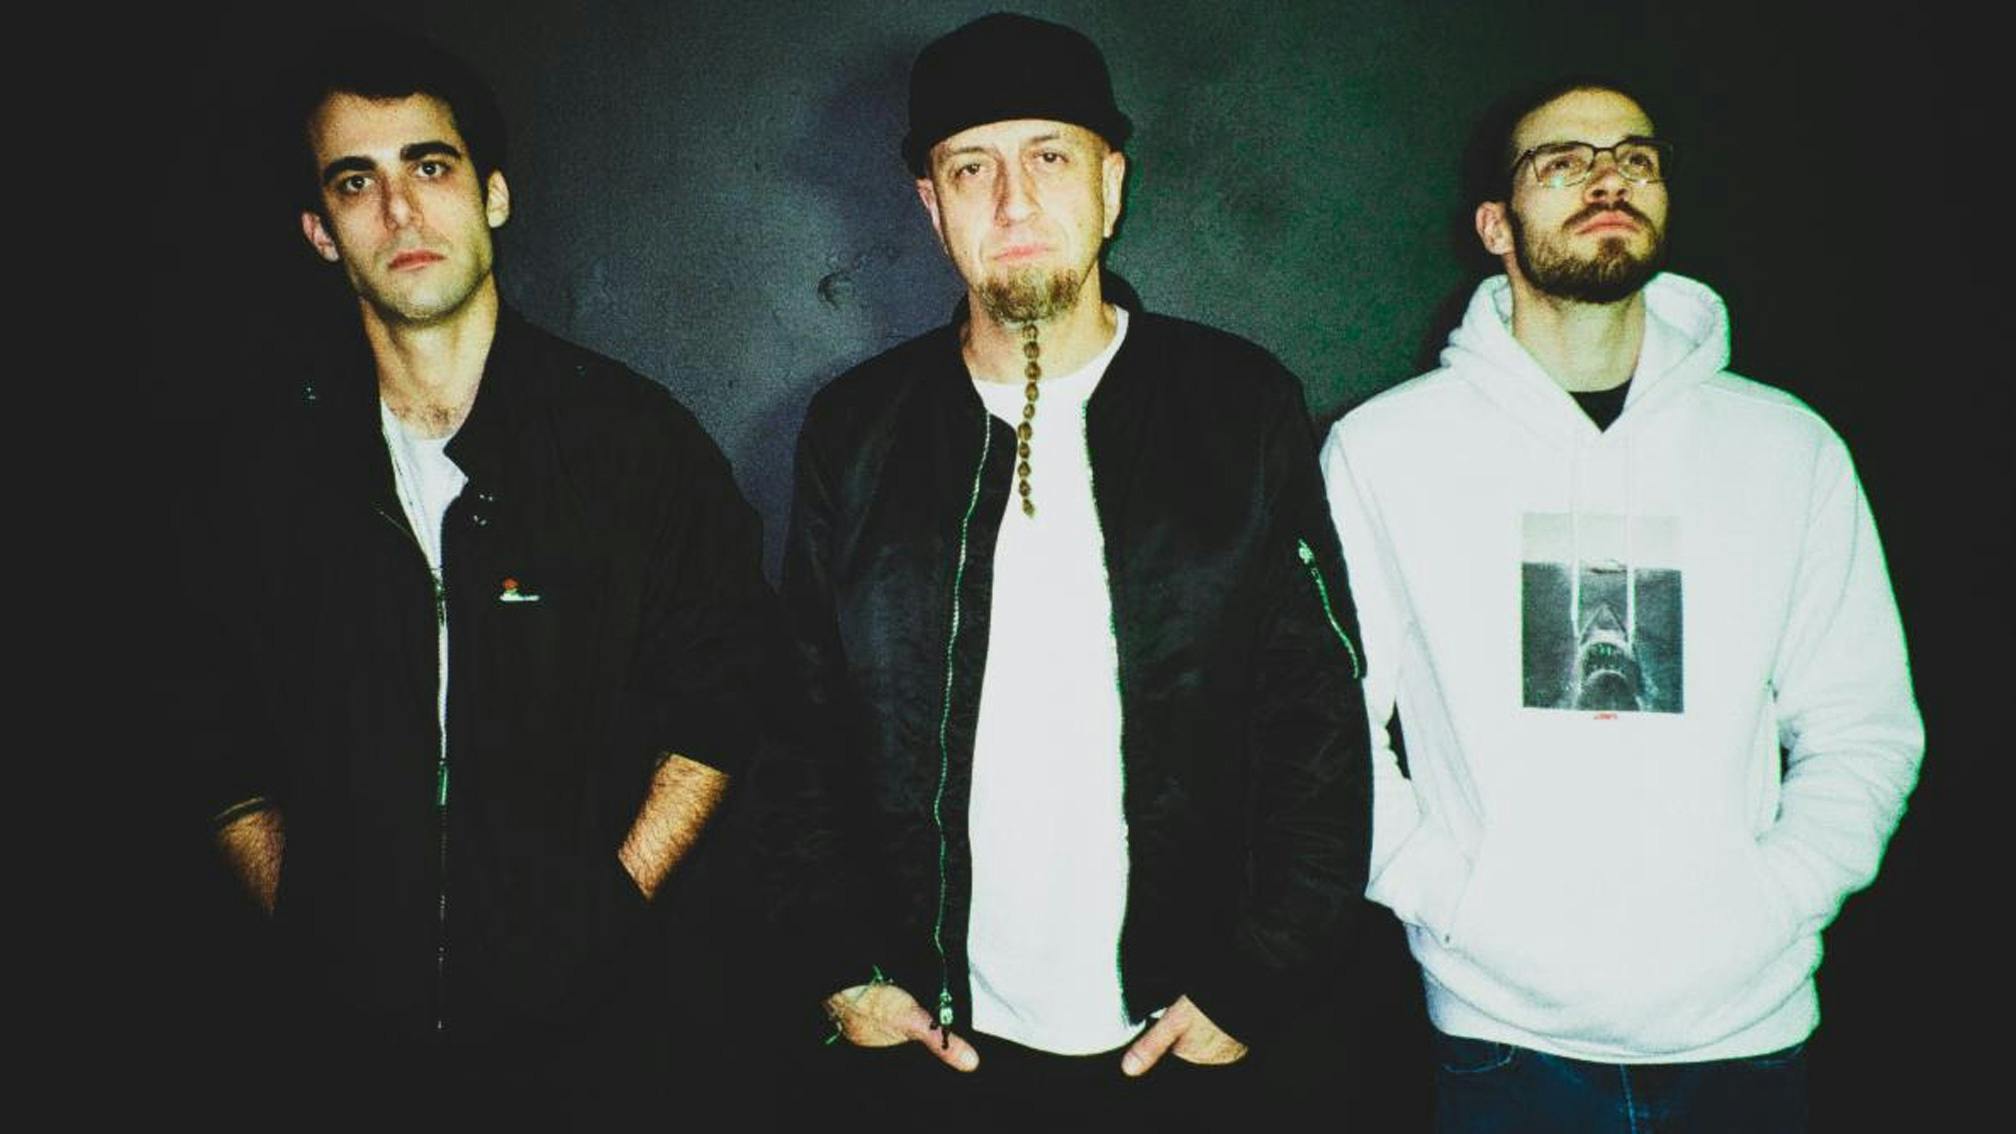 SOAD's Shavo Odadjian Launches New Project, North Kingsley